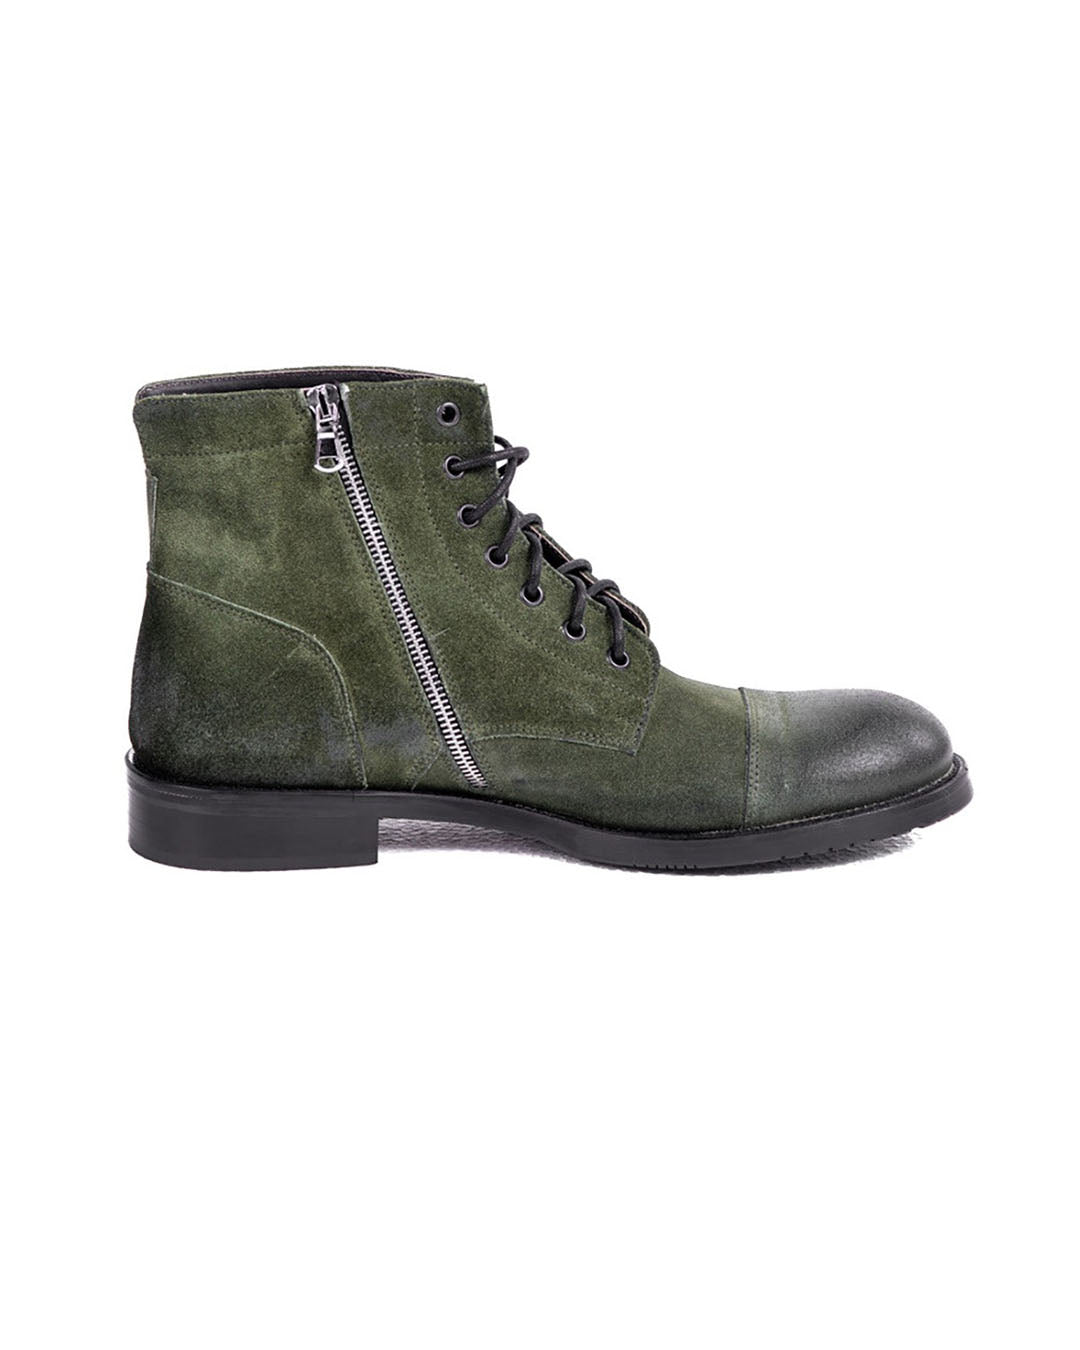 DAVY - GREEN SUEDE ANKLE BOOT WITH ZIP